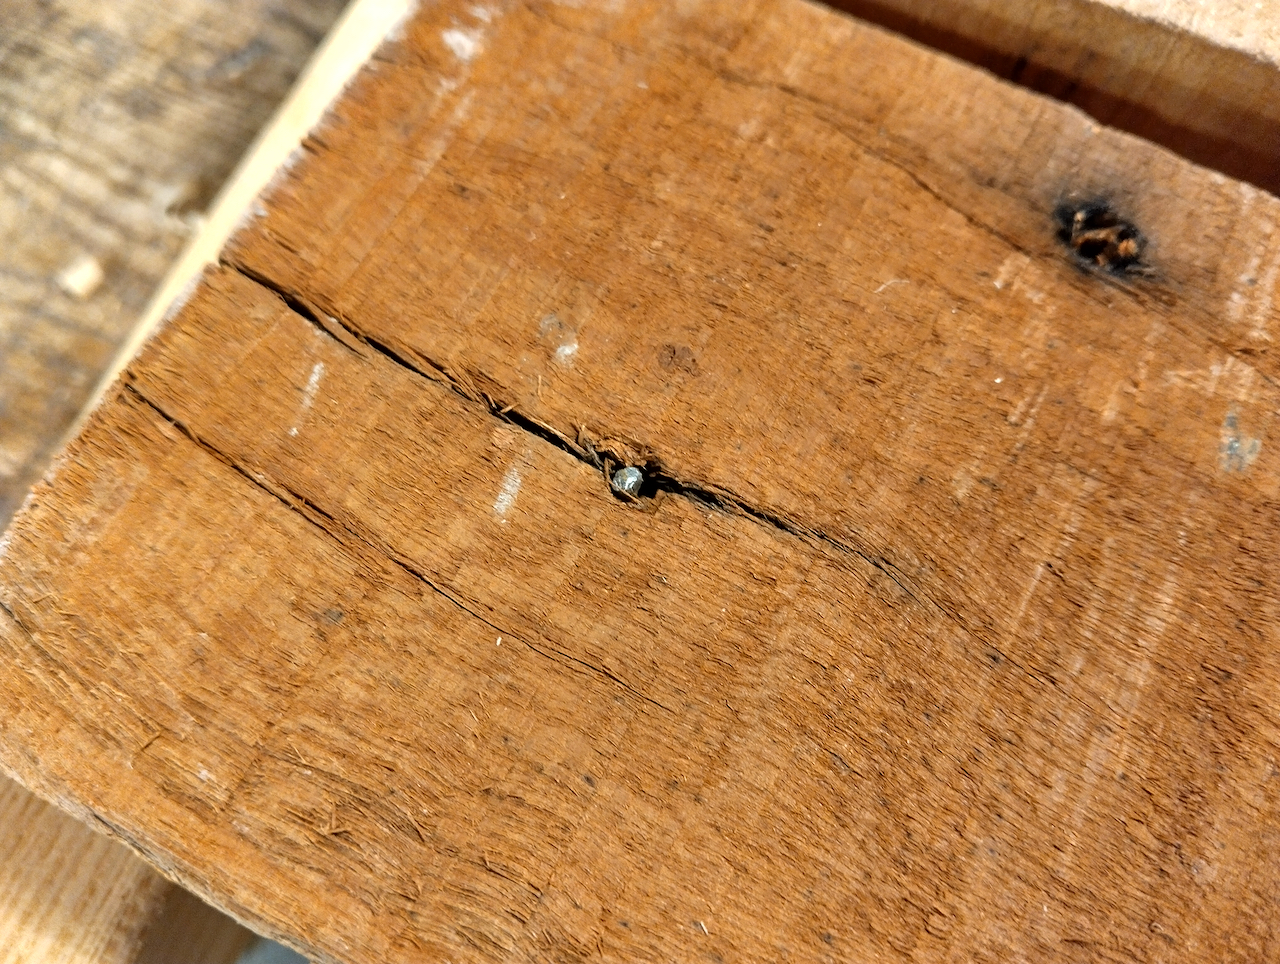 A board with a rusty nail that's been broken off. 